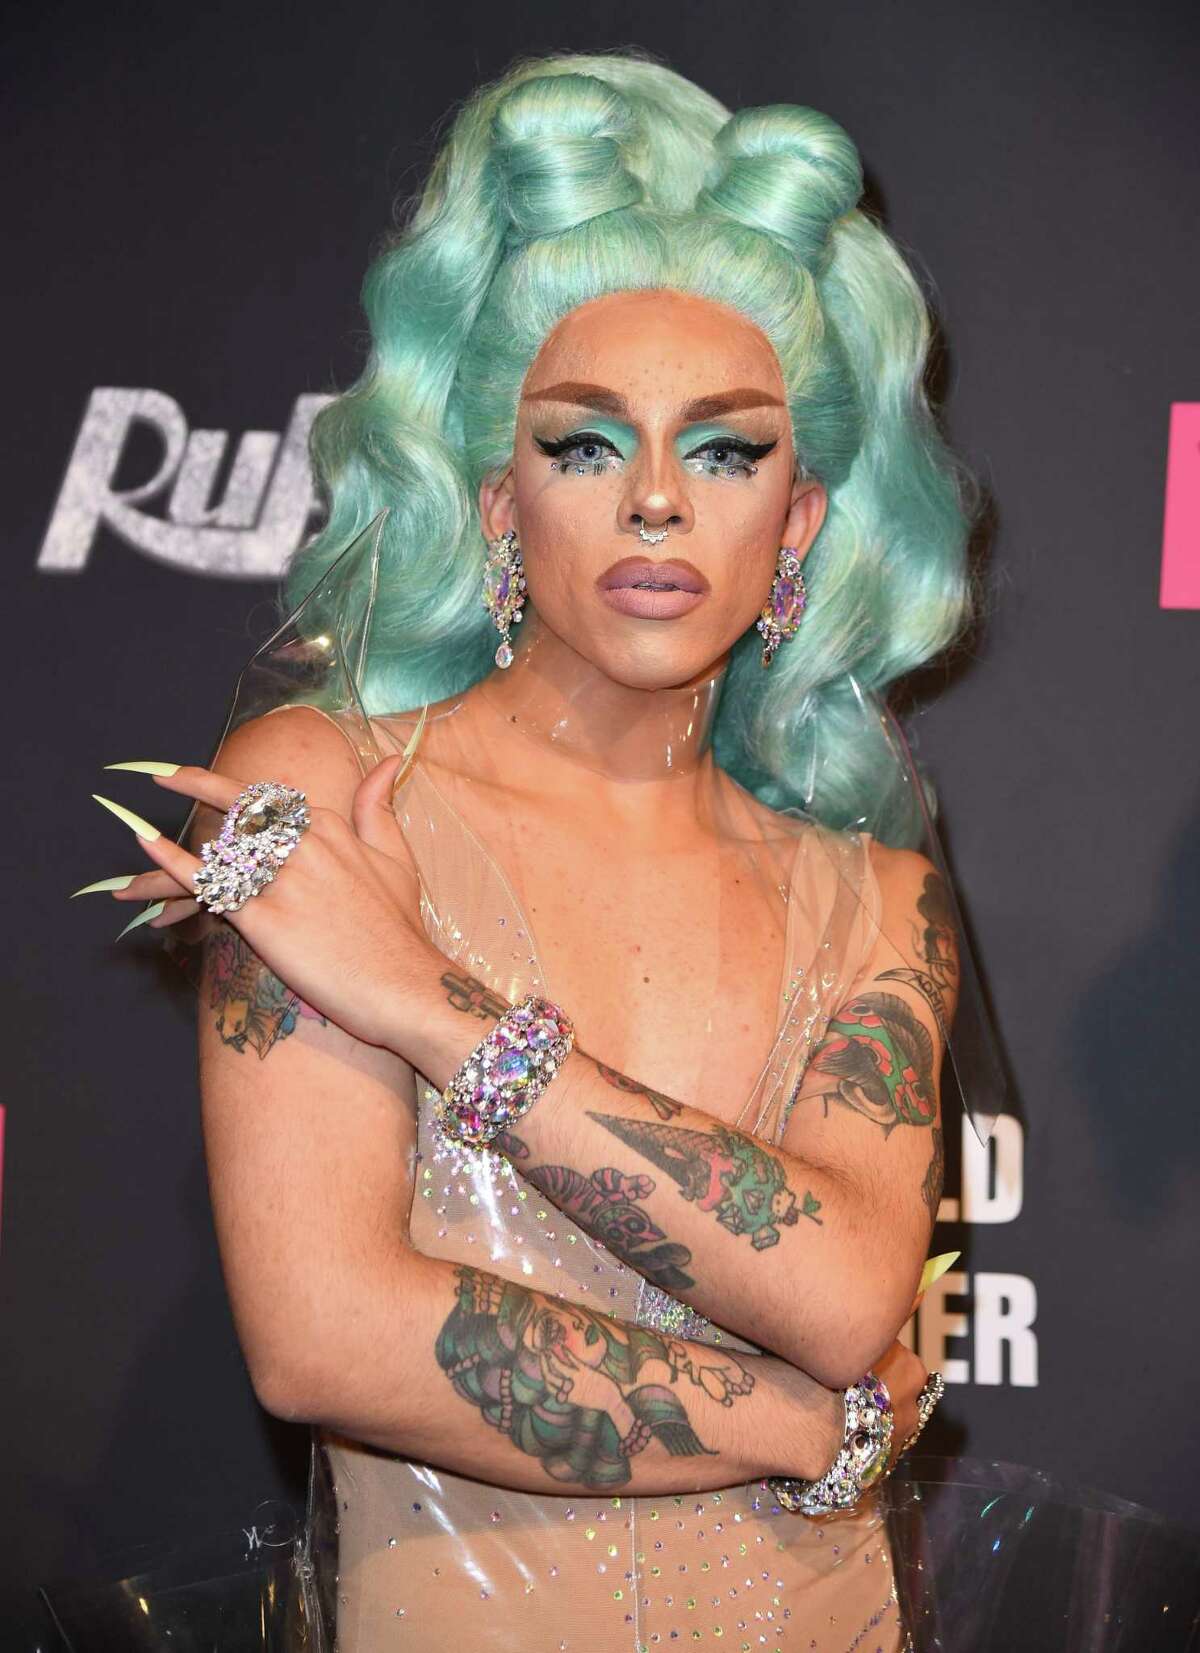 Former "RuPaul's Drag Race" contestant Aja appears Saturday at South Beach.